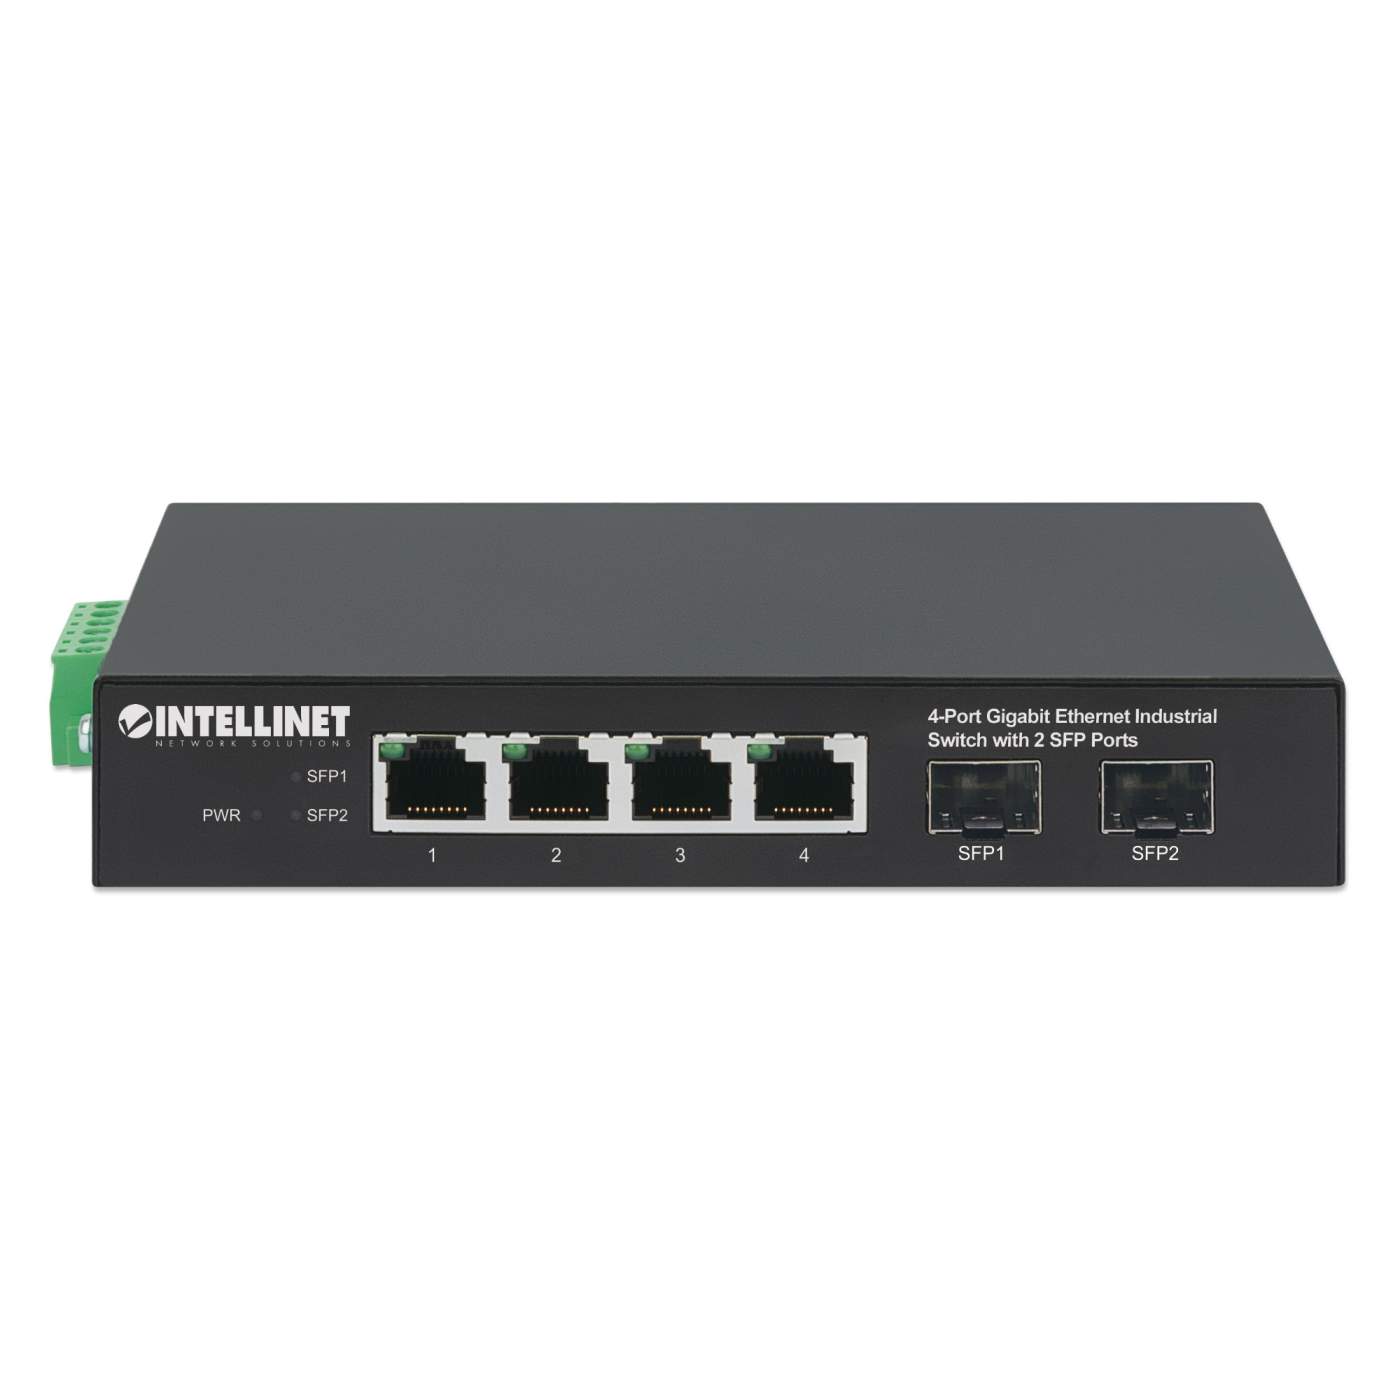 Industrial 4-Port Gigabit Ethernet Switch with 2 SFP Ports Image 4